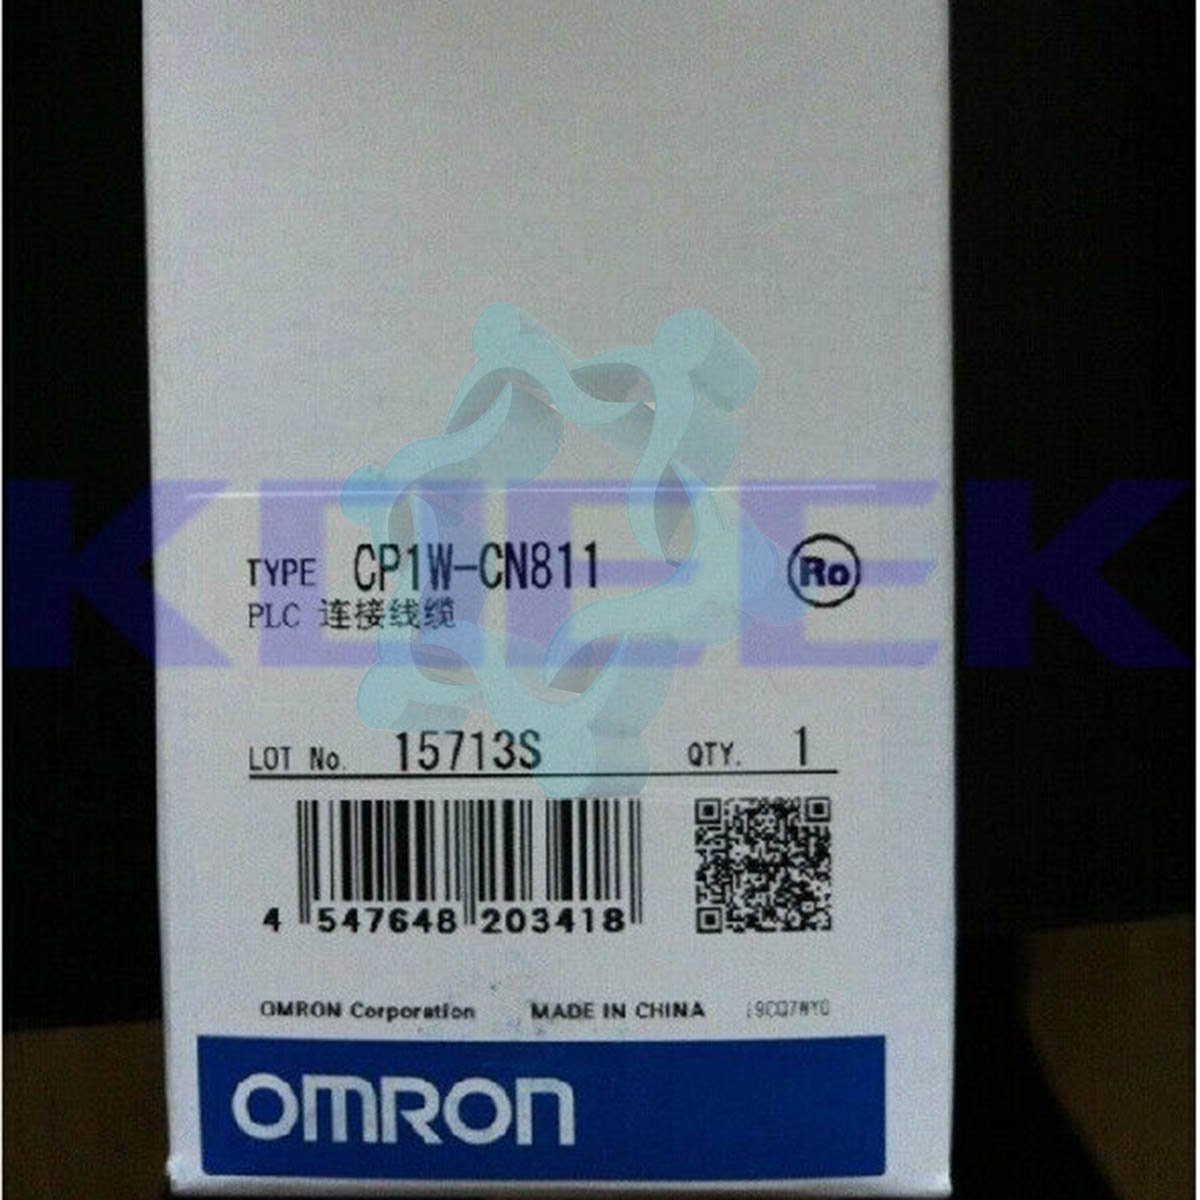 CP1W-CN811 KOEED 1, 80%, import_2020_10_10_031751, OMRON, Other